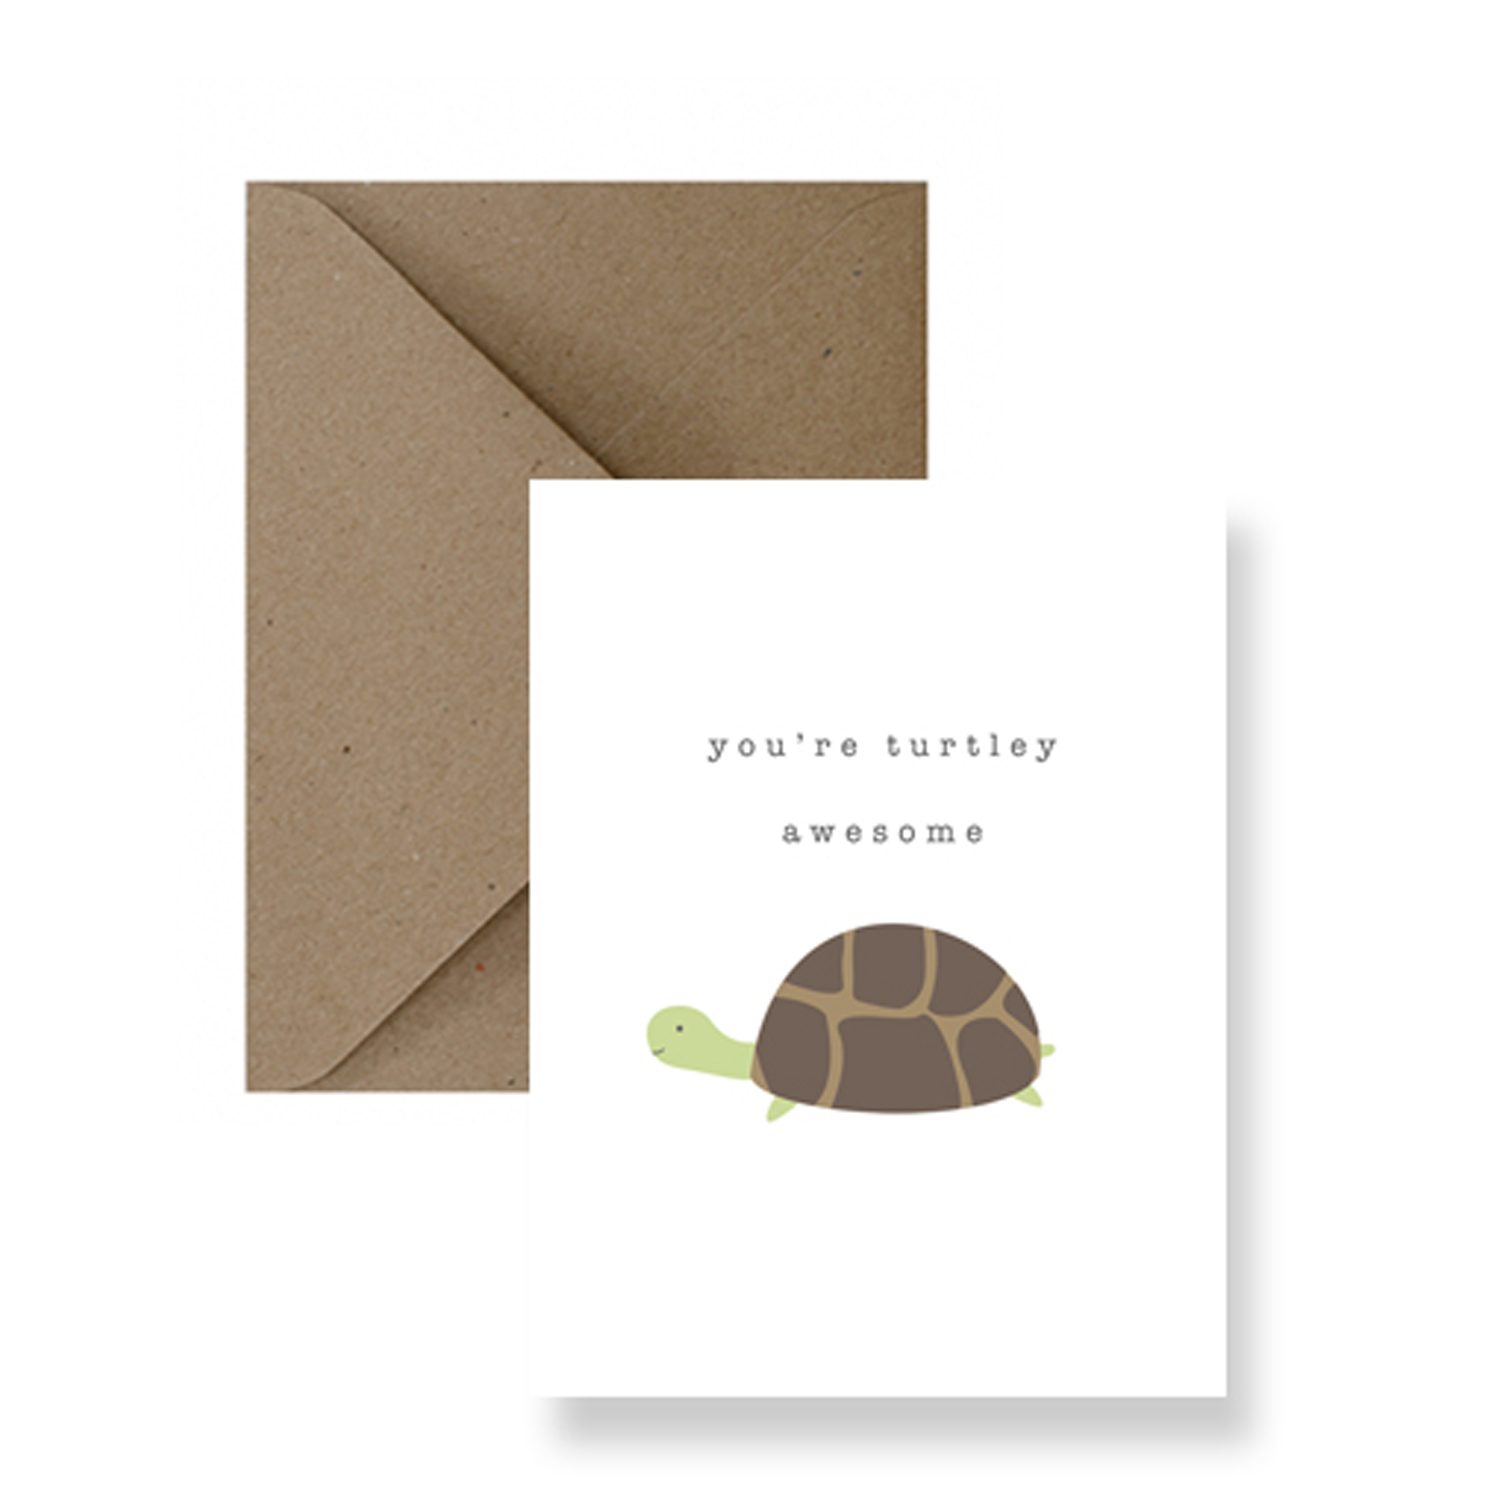 IMPAPER: You’re Turtley Awesome Product Image 1 of 4